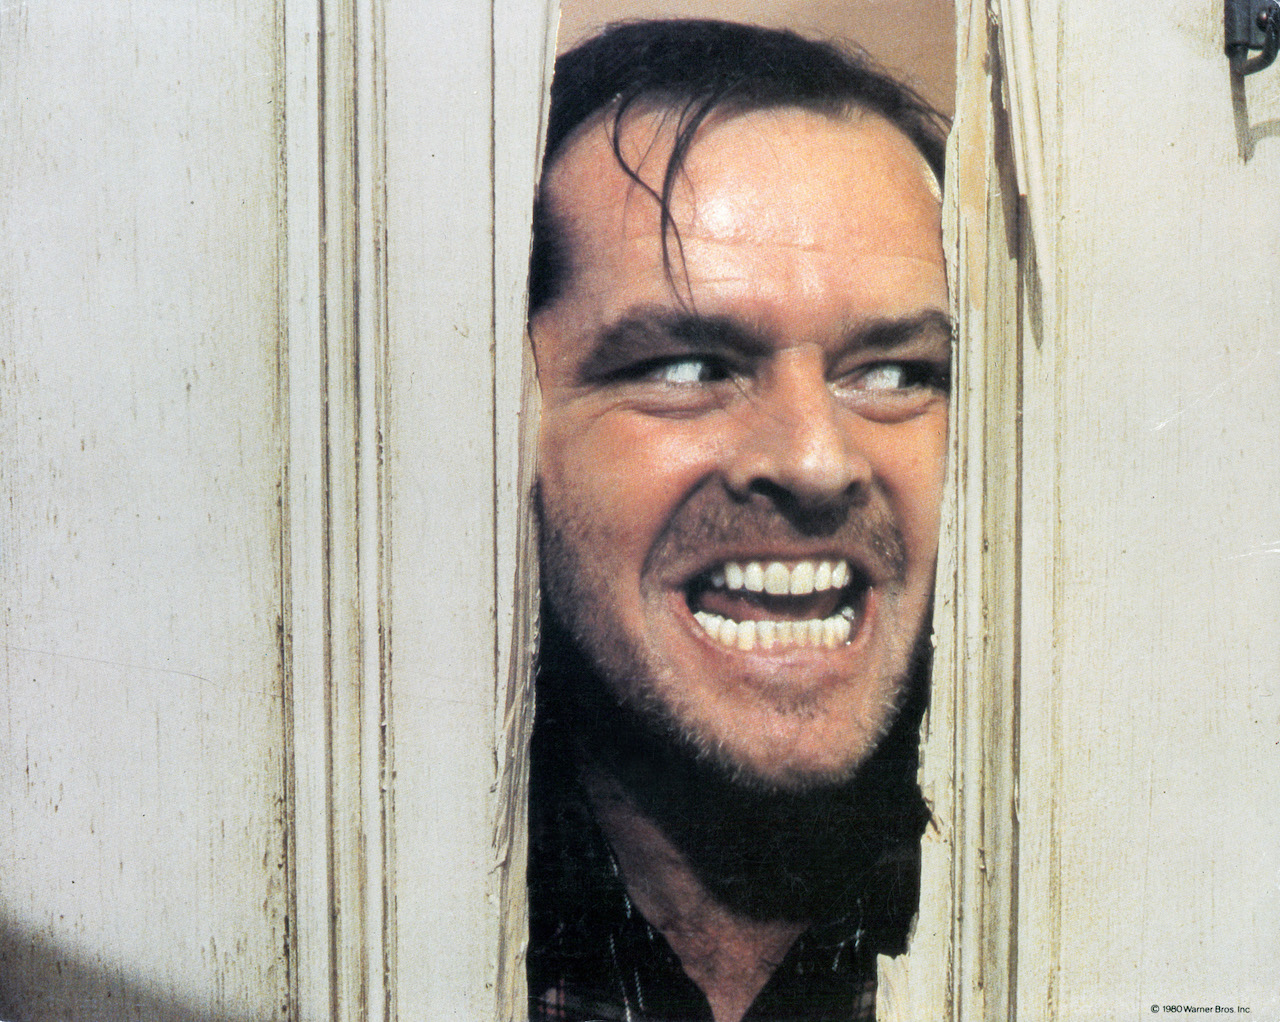 ‘The Shining’: Can You Stay at the Overlook Hotel?